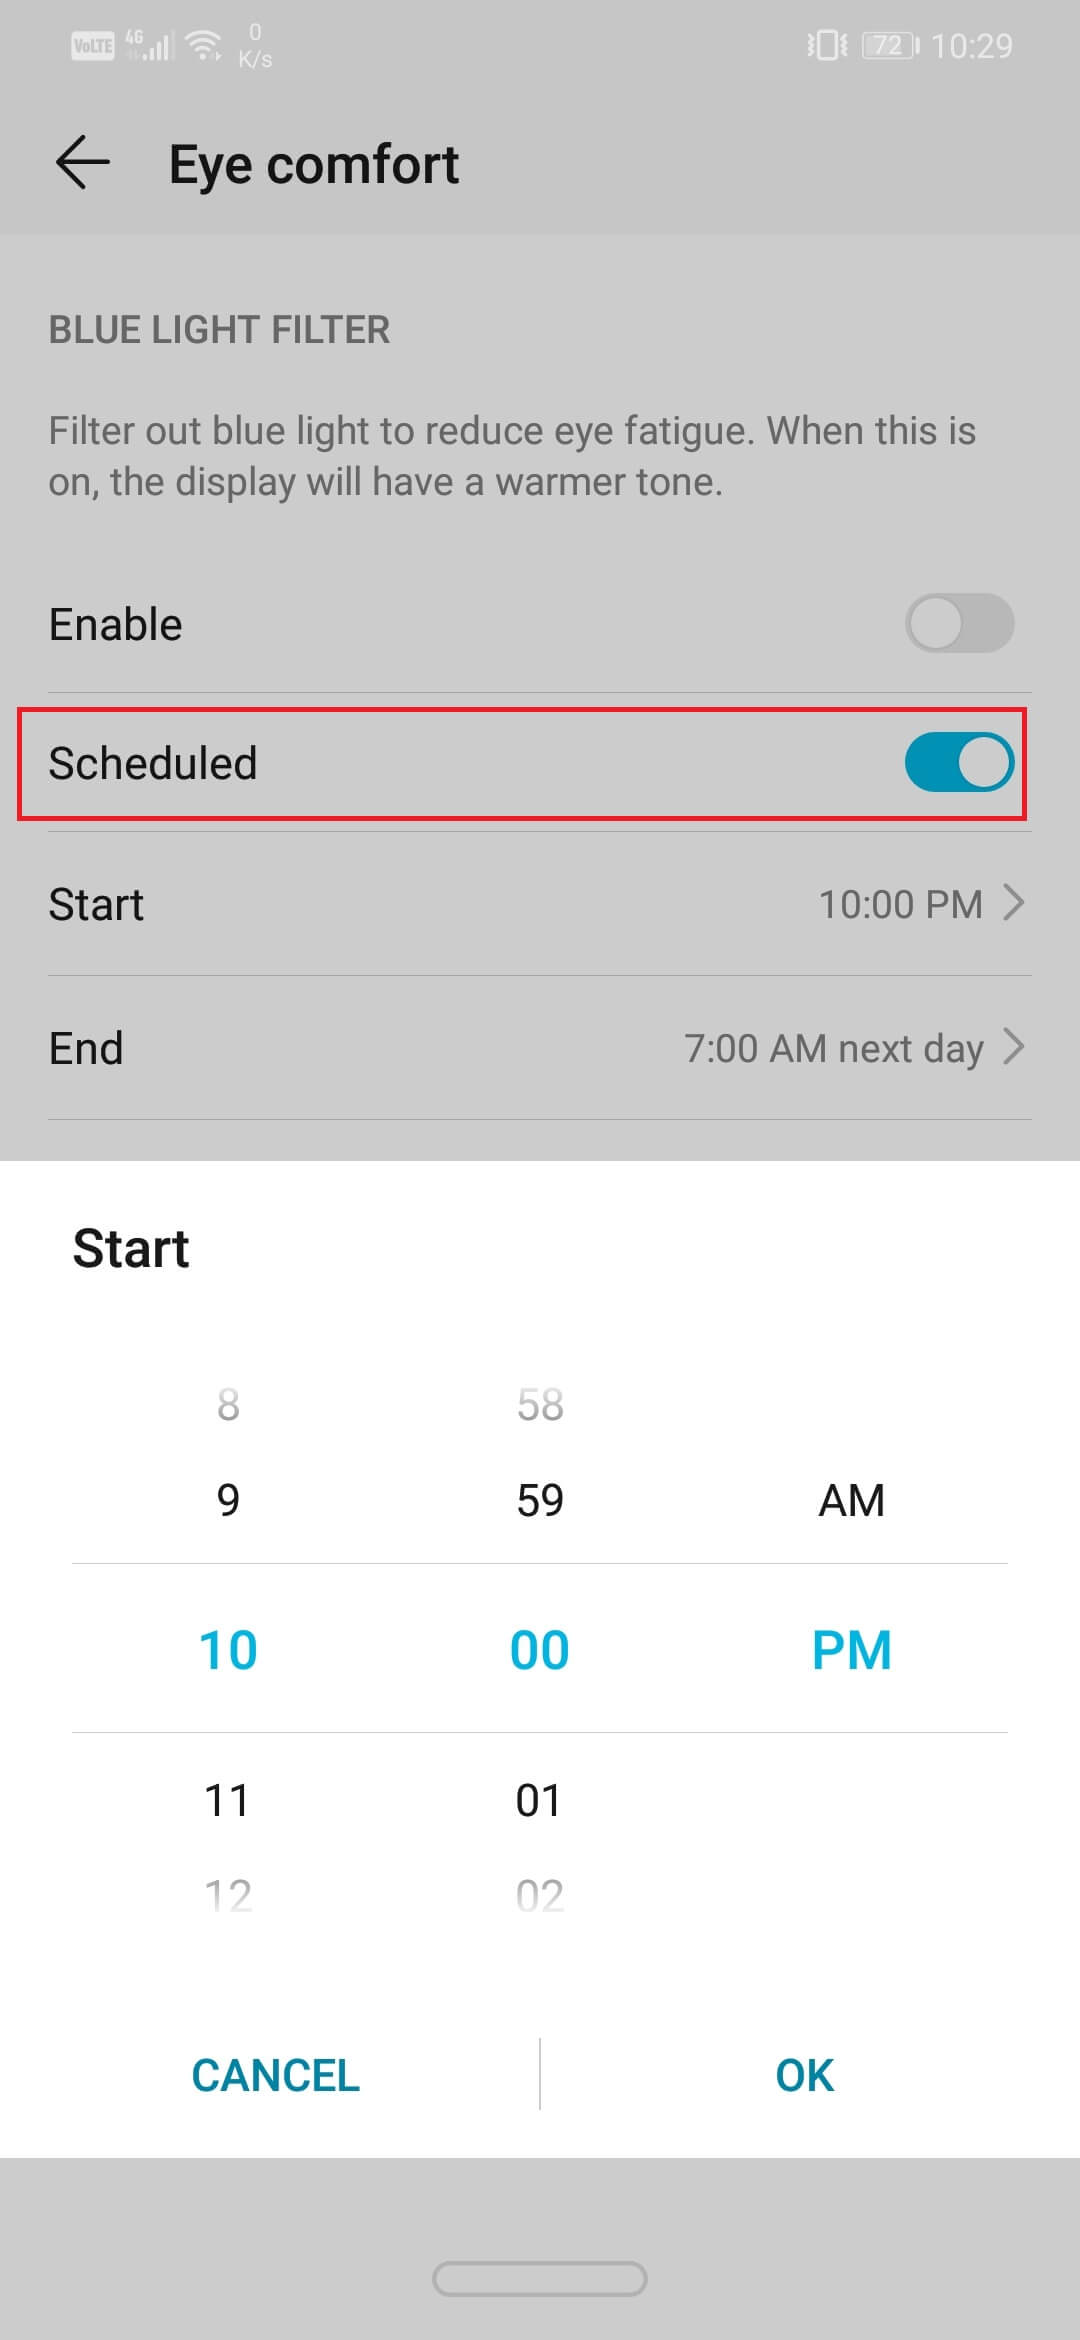 enable the toggle switch next to the Scheduled option.